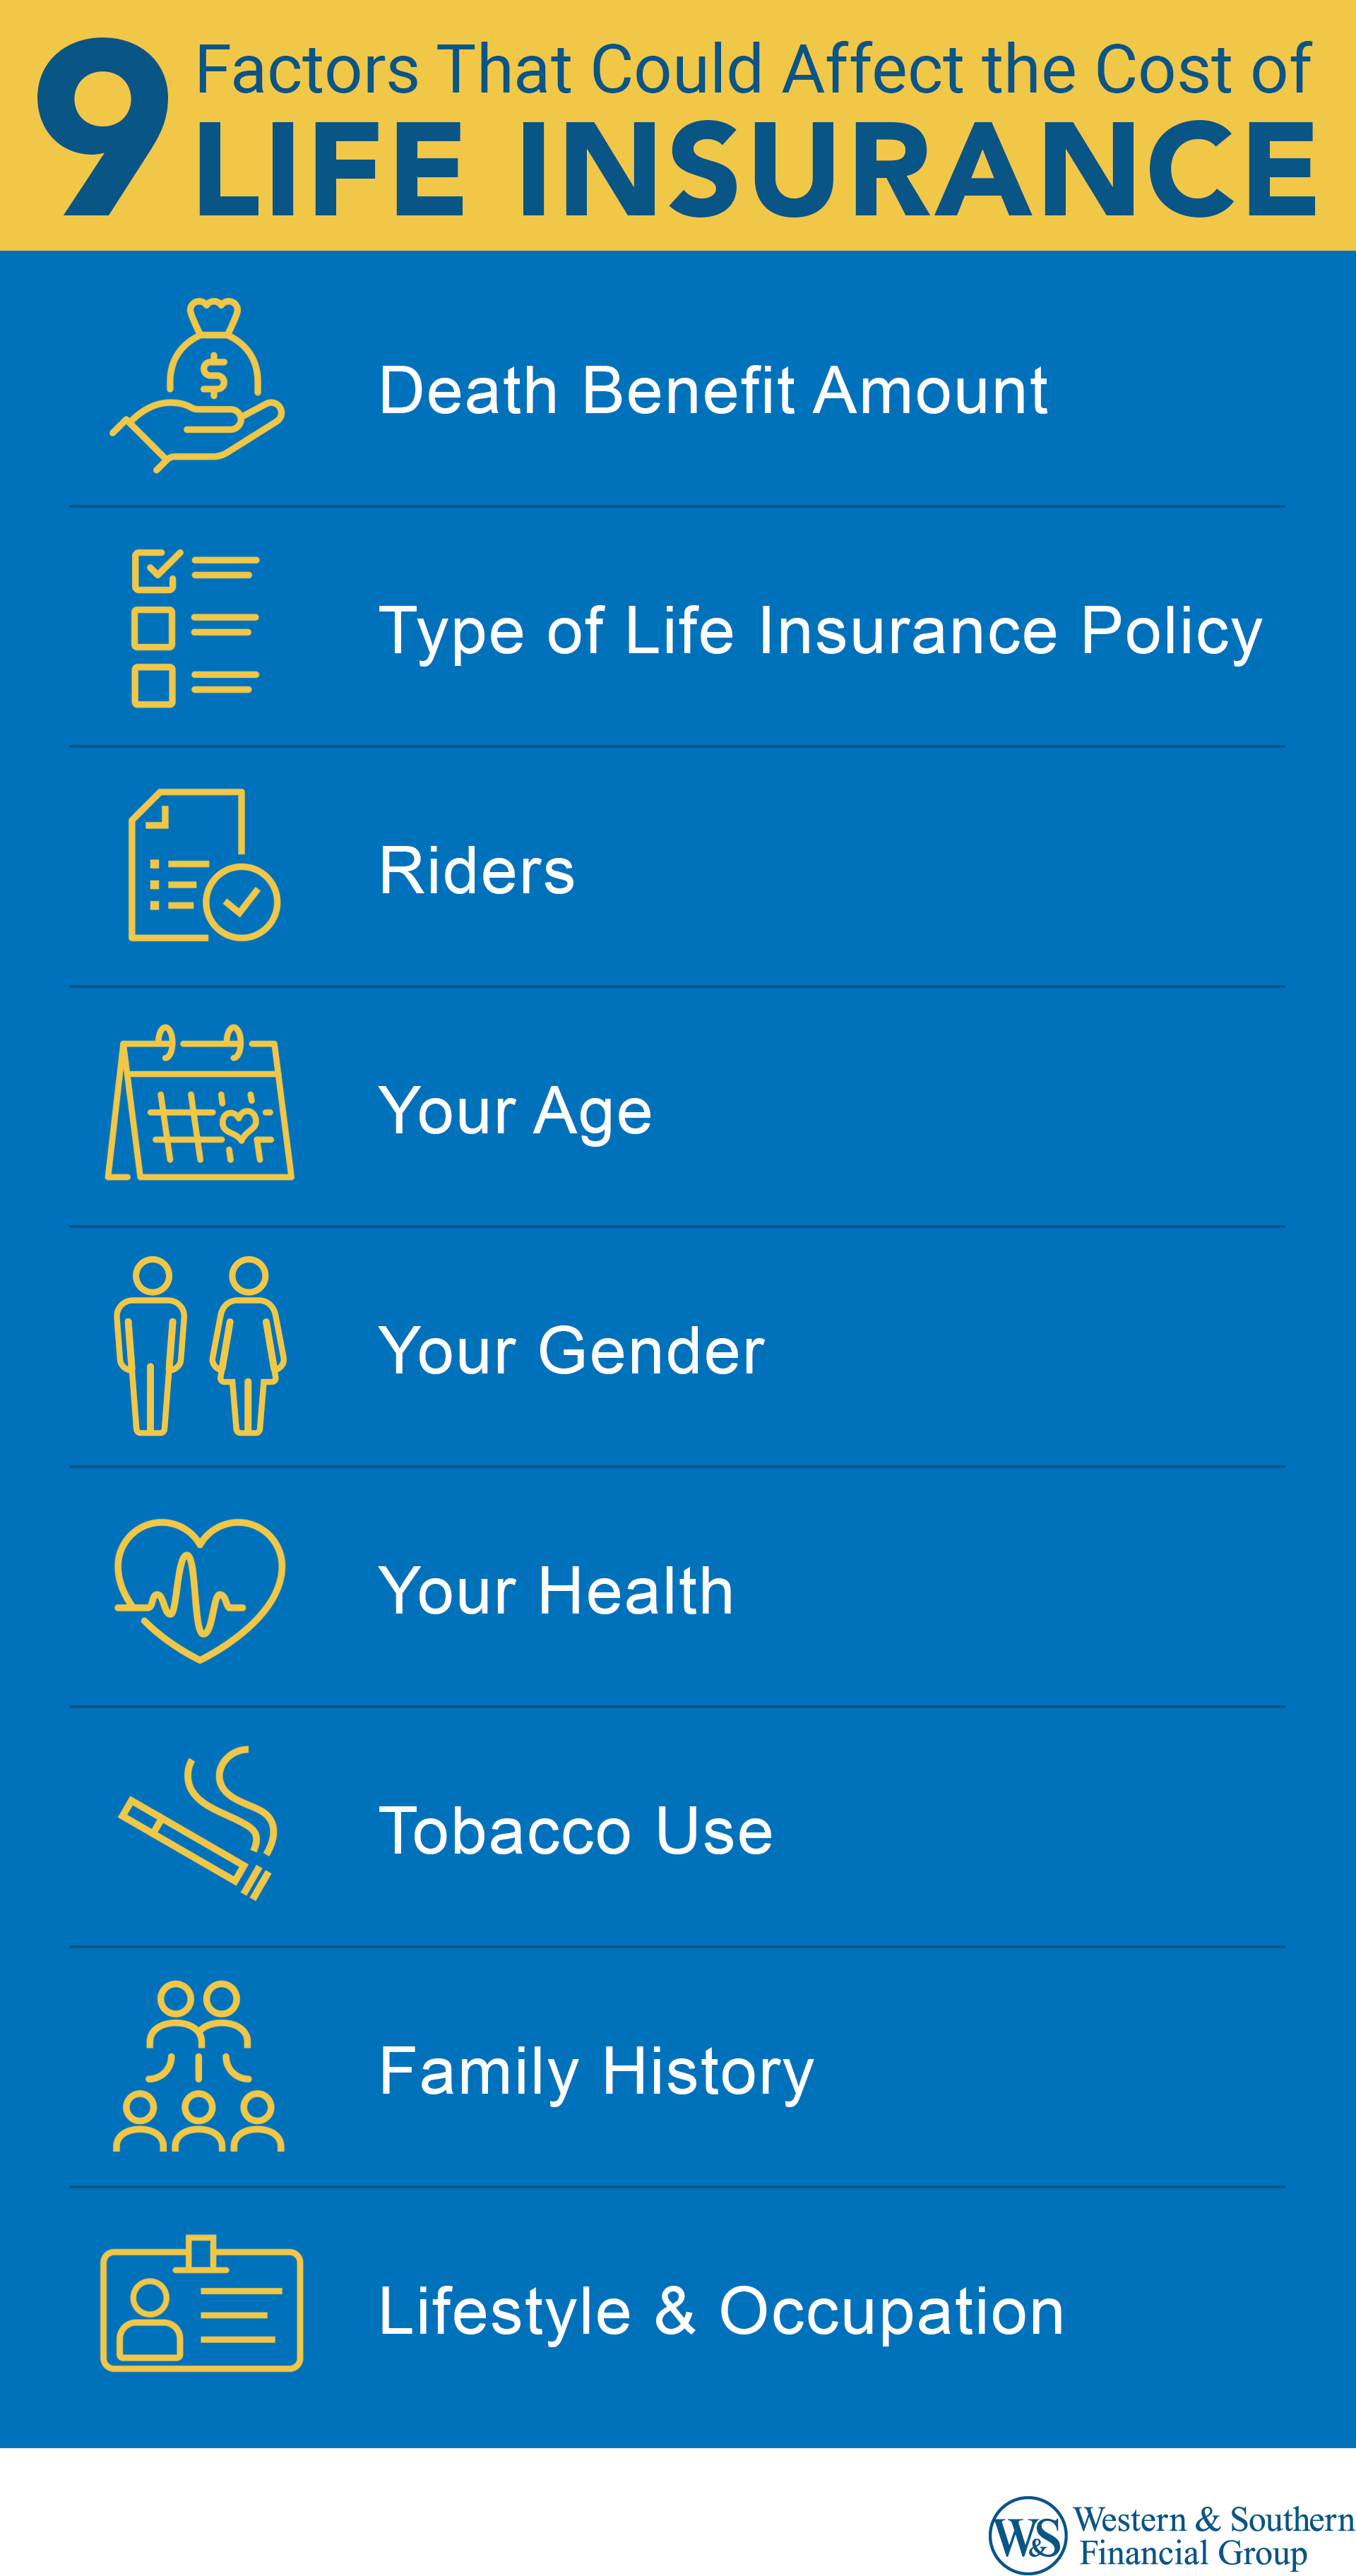 9 factors that could affect the cost of life insurance include the death benefit amount, type of life insurance policy, riders, your age, your gender, your health, tobacco use, family history and lifestyle/occupation.